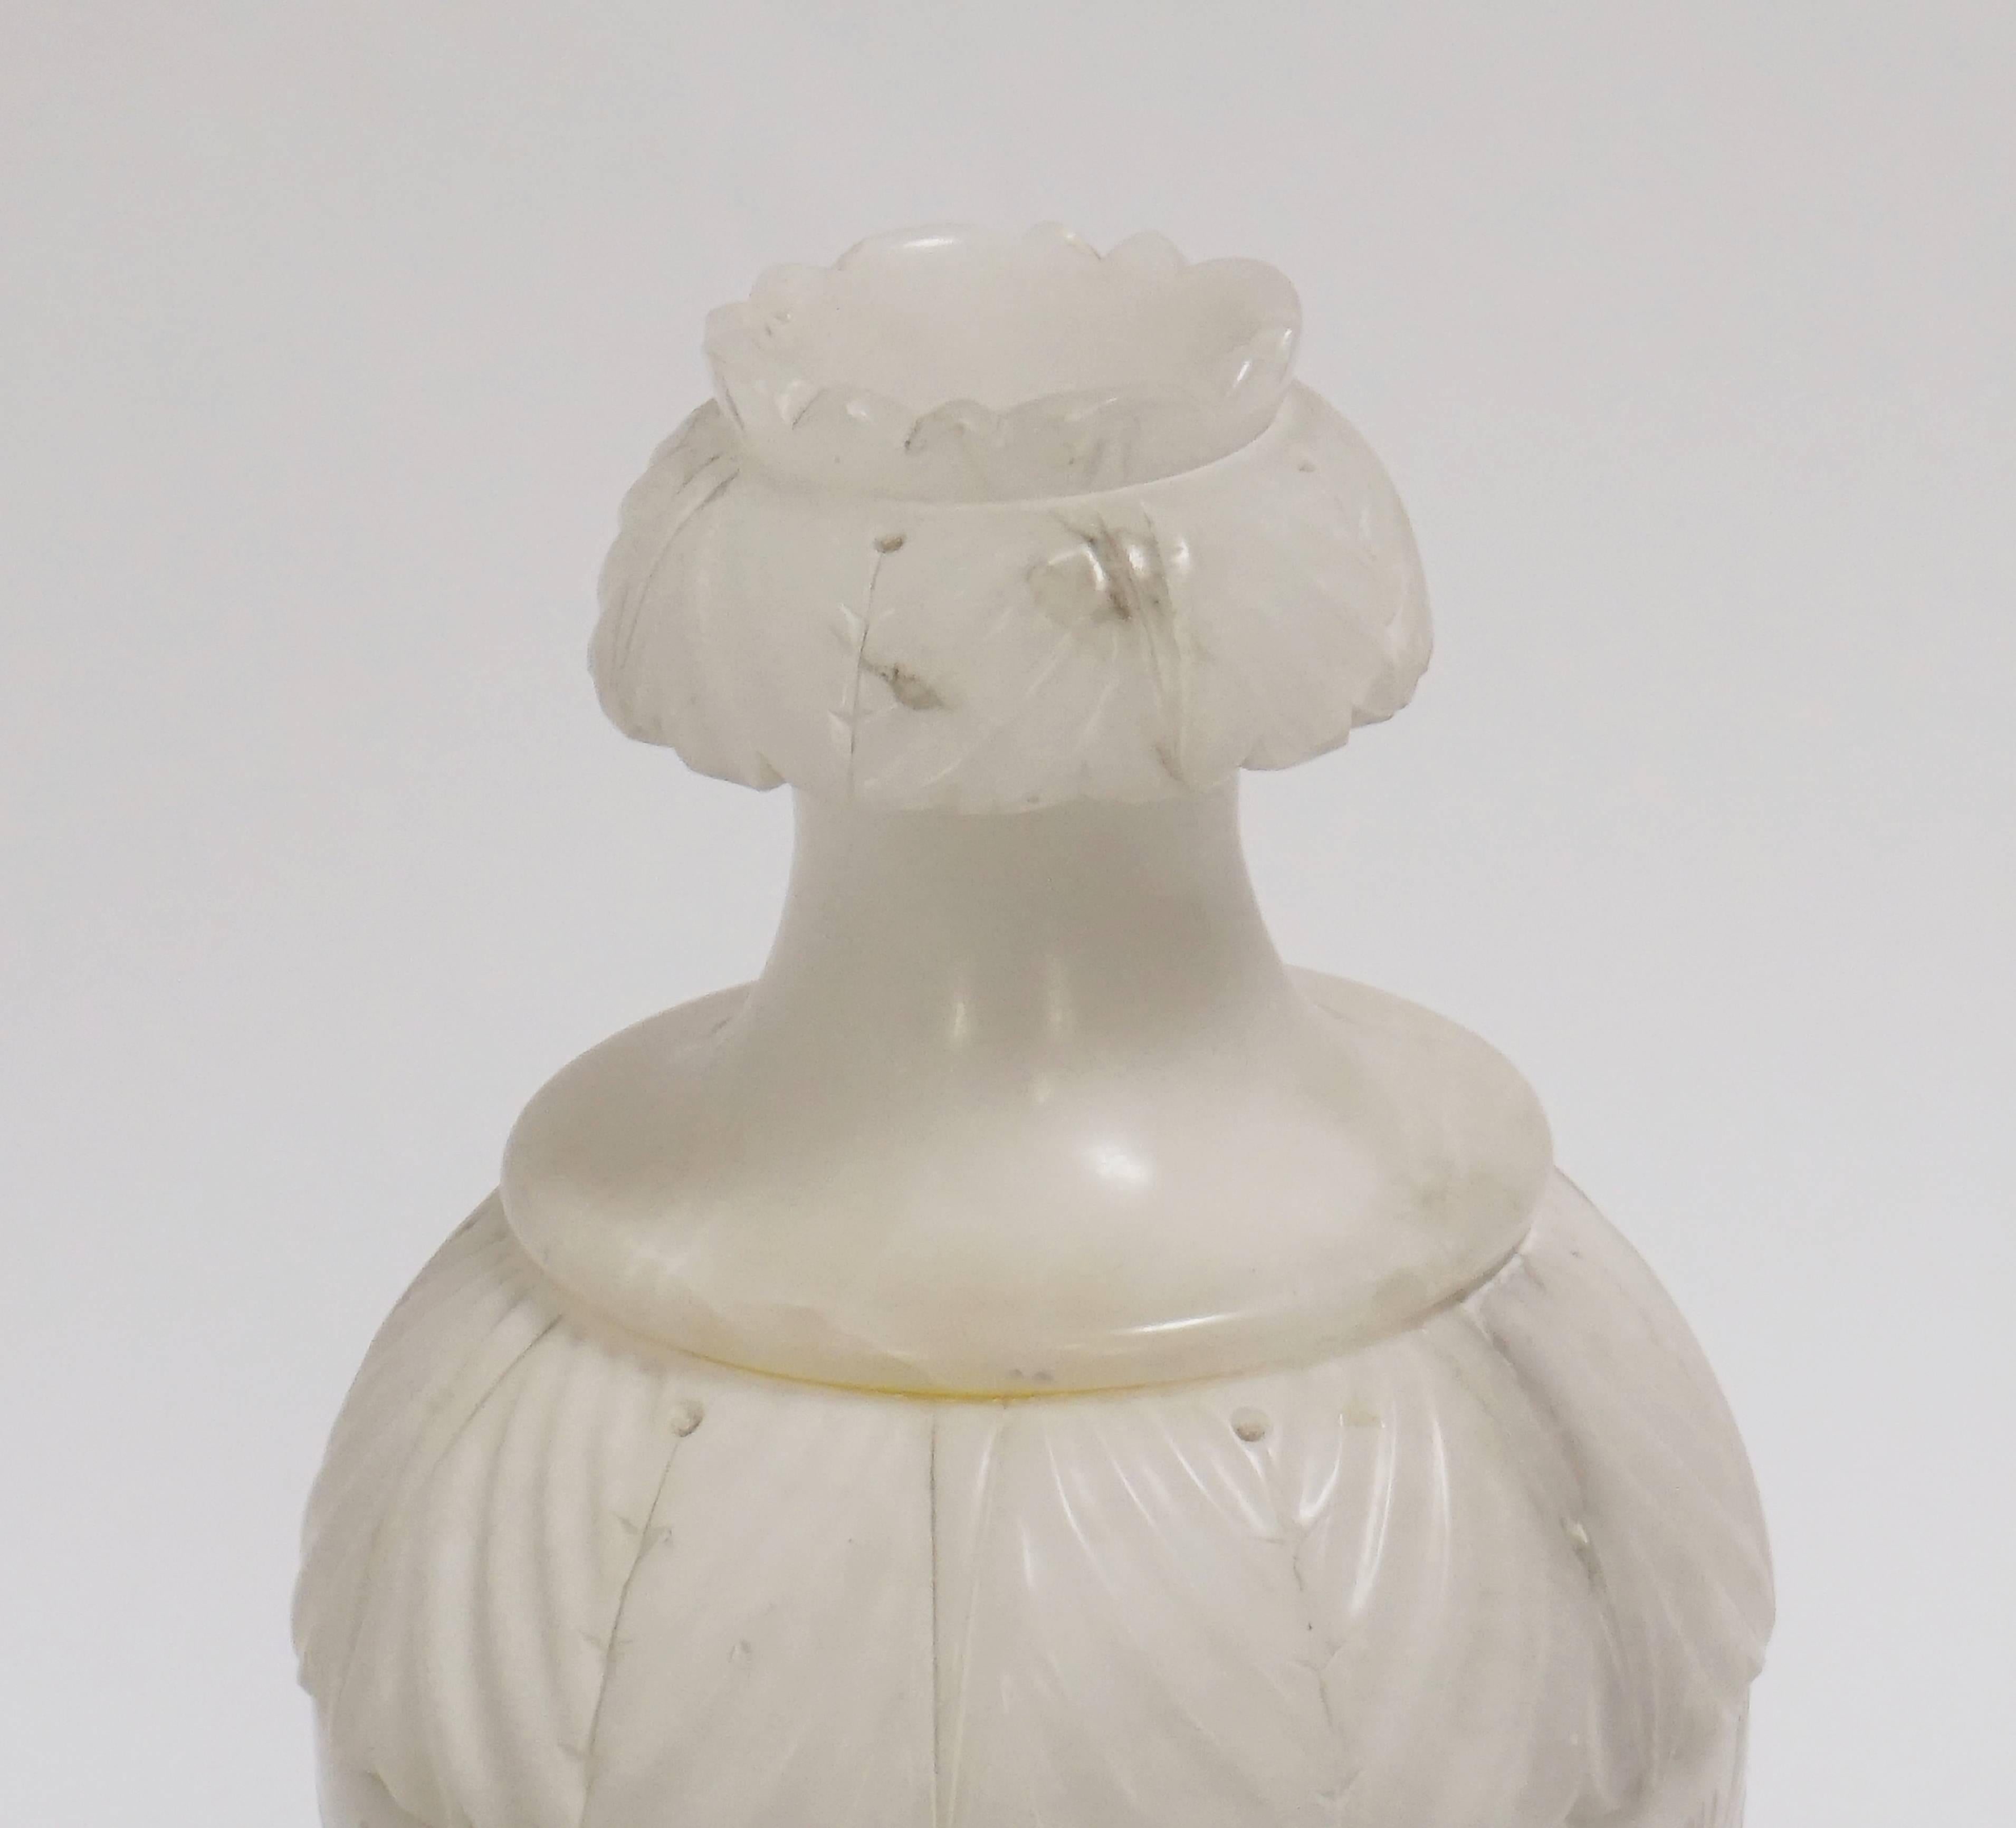 This Alabaster urn table lamp is lidded with interior sockets. The lid has an opening at the top. Delicate details are carved throughout. Single interior candelabra socket with a switch on the cord.